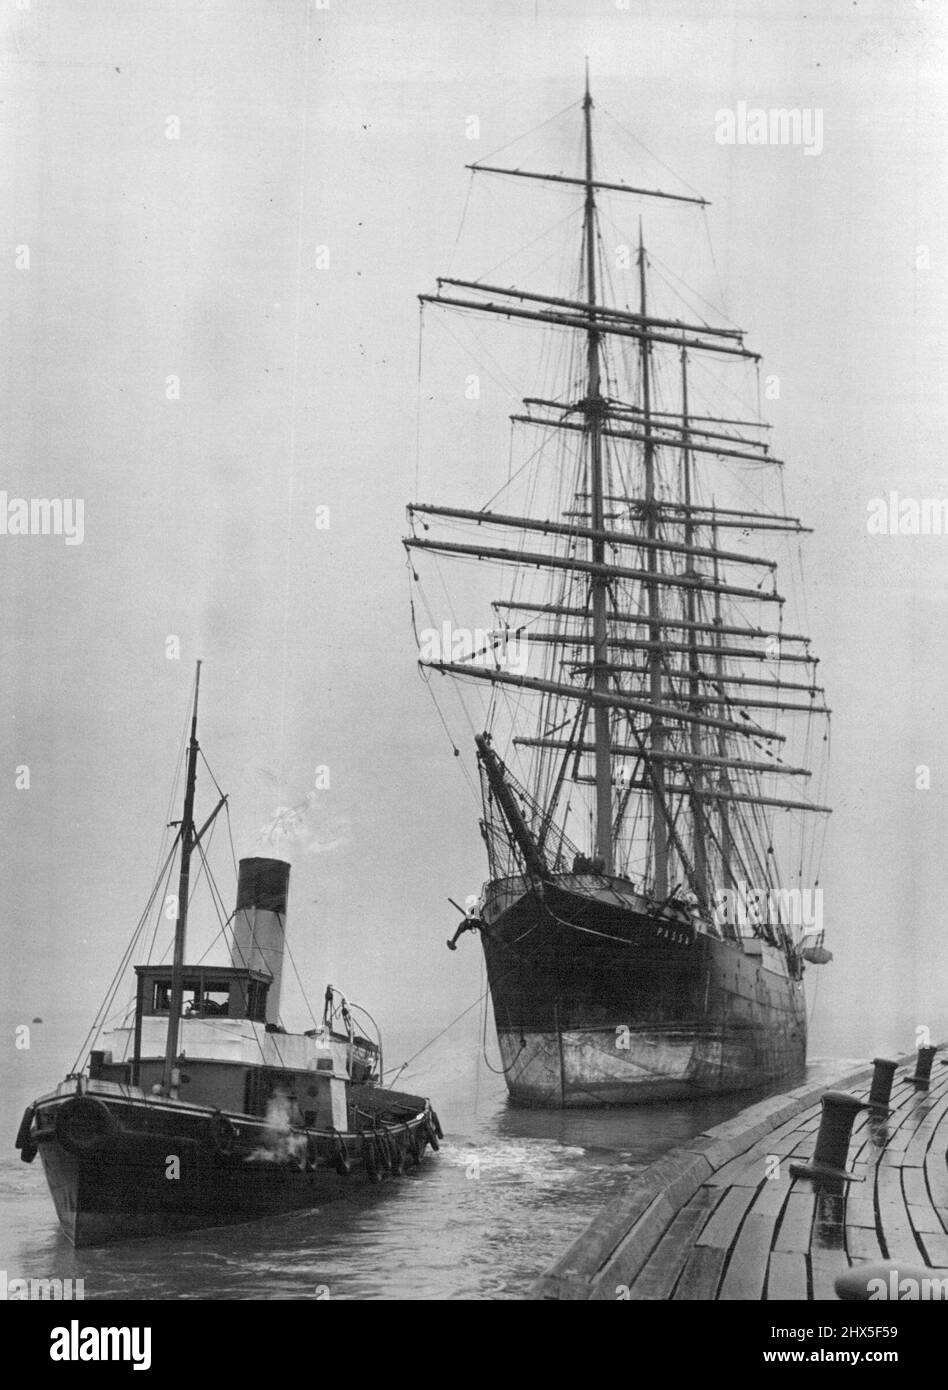 The Passing Of The Old -- The four-masted finnish barque, Passat, one of the last of the windjammers, being toward from Penarth, Glamorgan, Wales. She was destined for Antwerp, Belgium, where she will be broken up, but the tug developed engine trouble and the Passat was delayed at the start. March 07, 1951. (Photo by Paul Popper Ltd.). Stock Photo